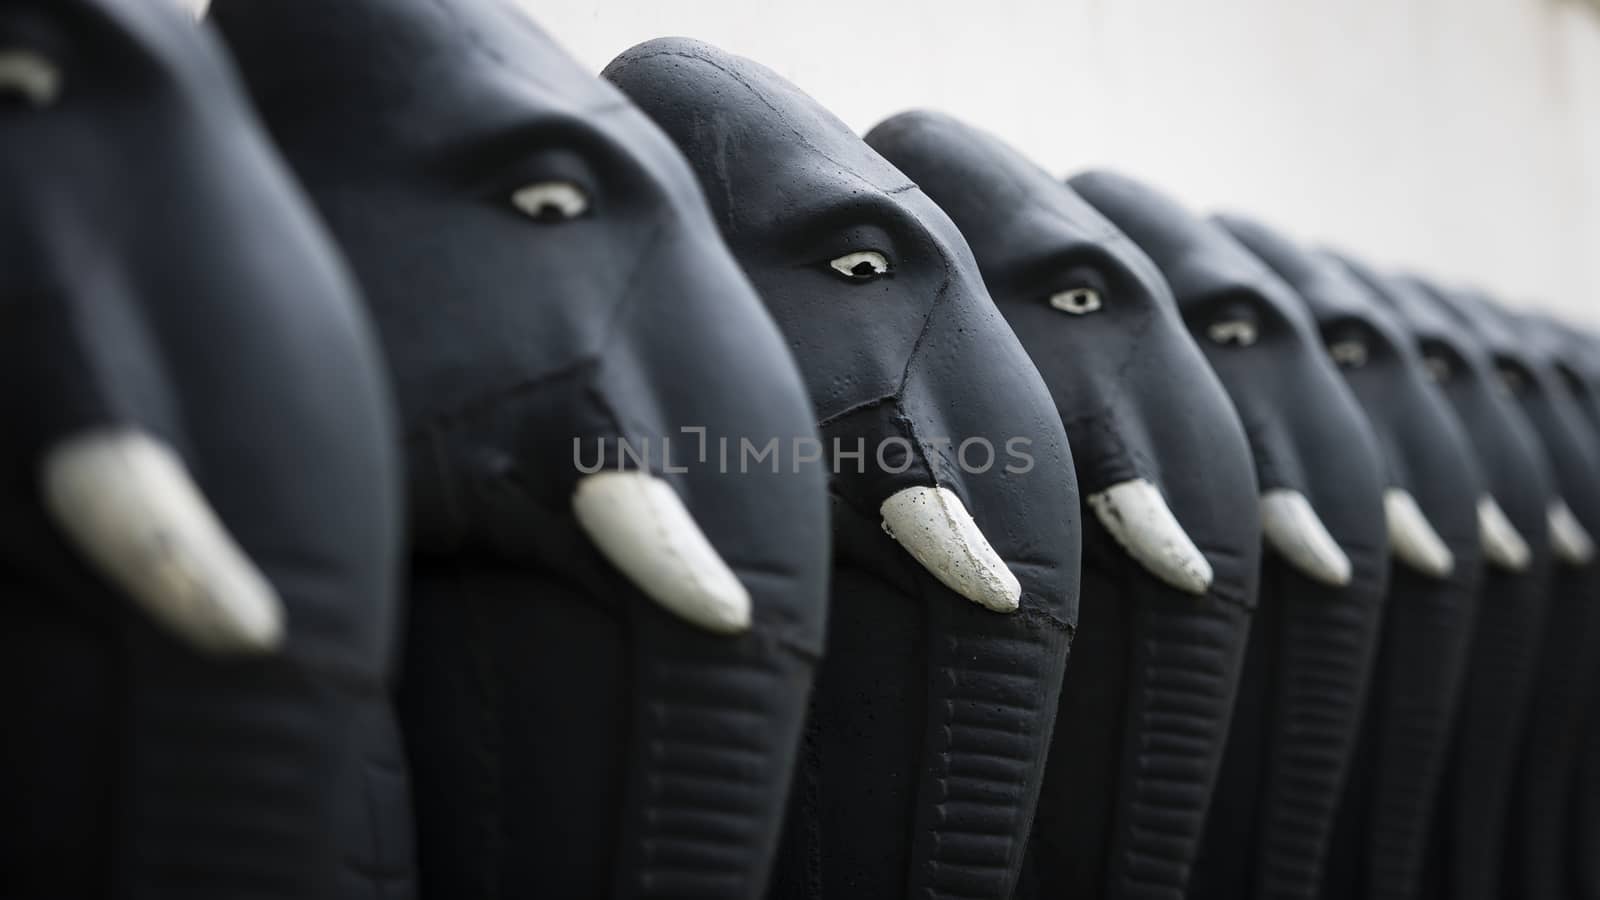 A row of frontline elephants sculptures at the temple.

Photographed using Nikon-D800E (36 megapixels) DSLR with AF-S NIKKOR 70-200 mm f/2.8G ED VR II lens at focal length 122 mm, ISO 100, and exposure 1/250 sec at f/2.8.